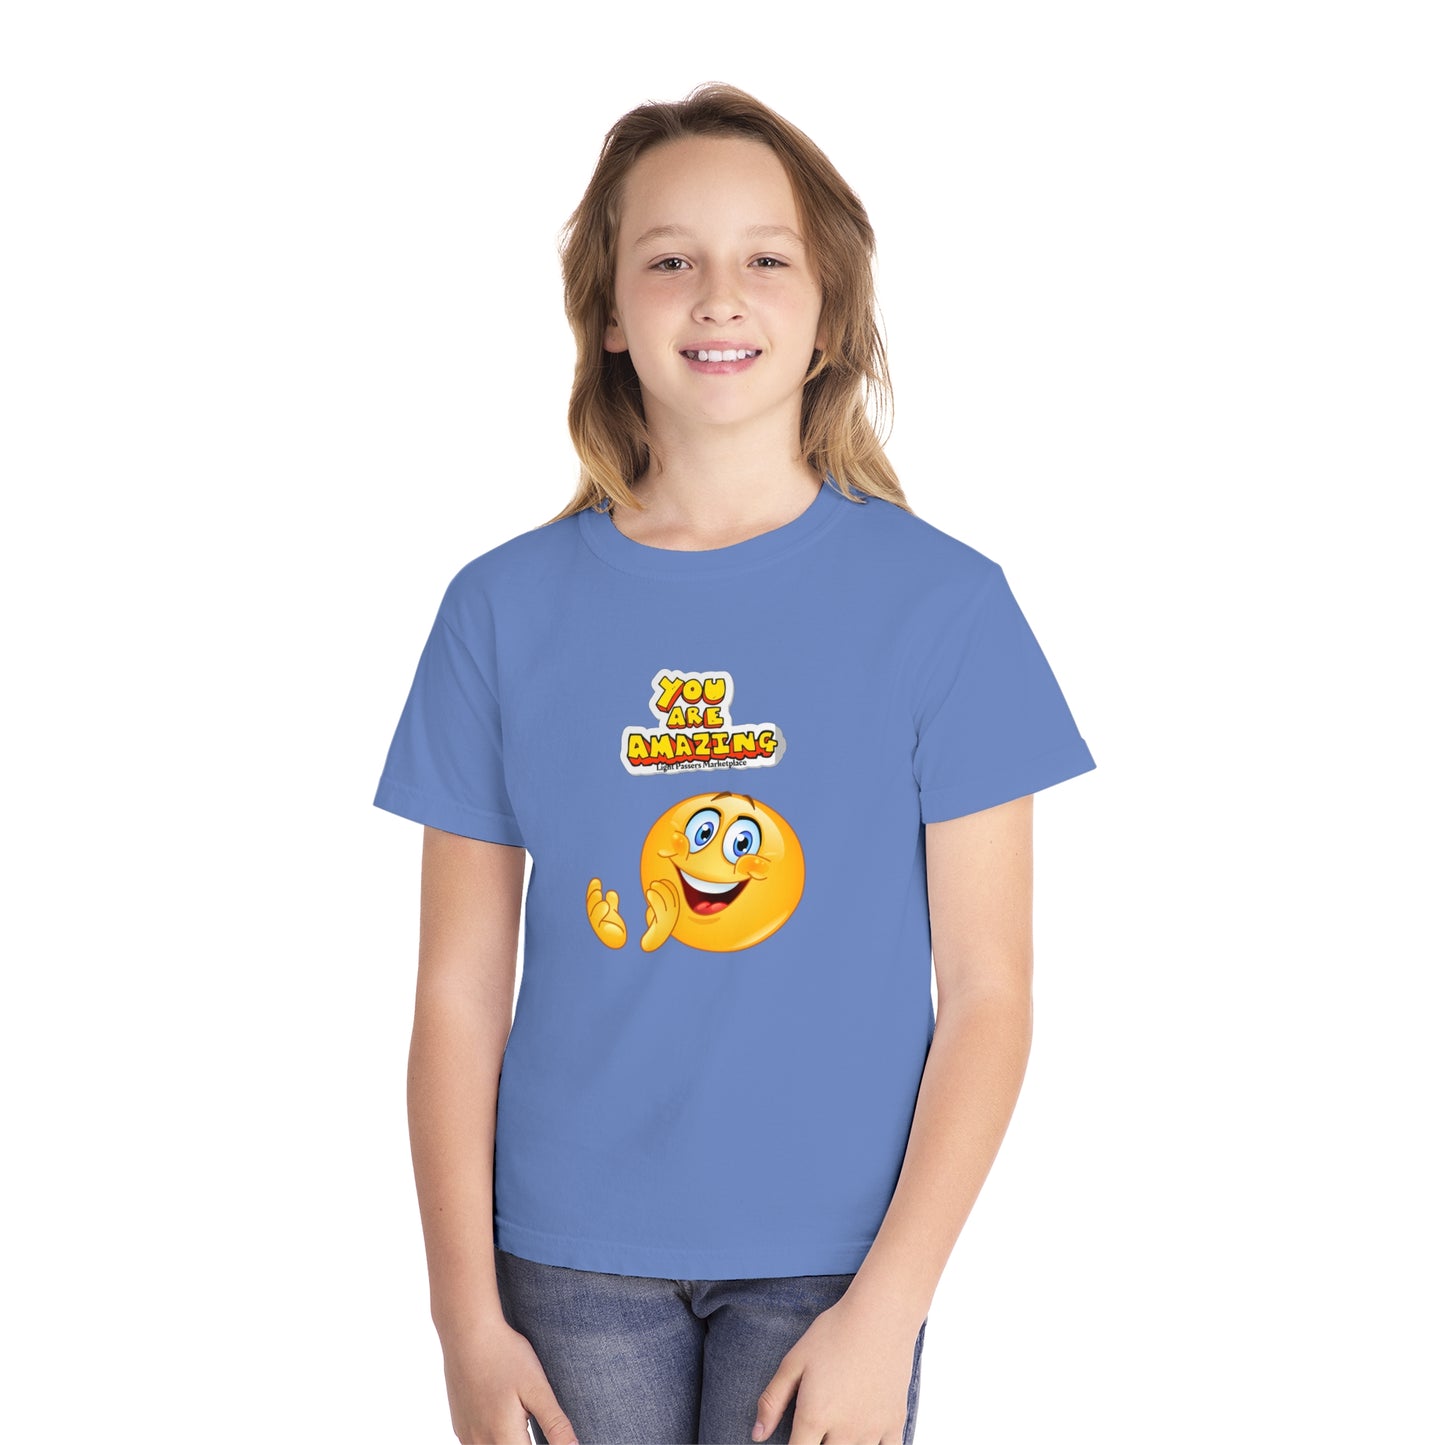 Light Passers Marketplace Empowering You are Amazing Youth Midweight T-shirt Simple Messages, Mental Health